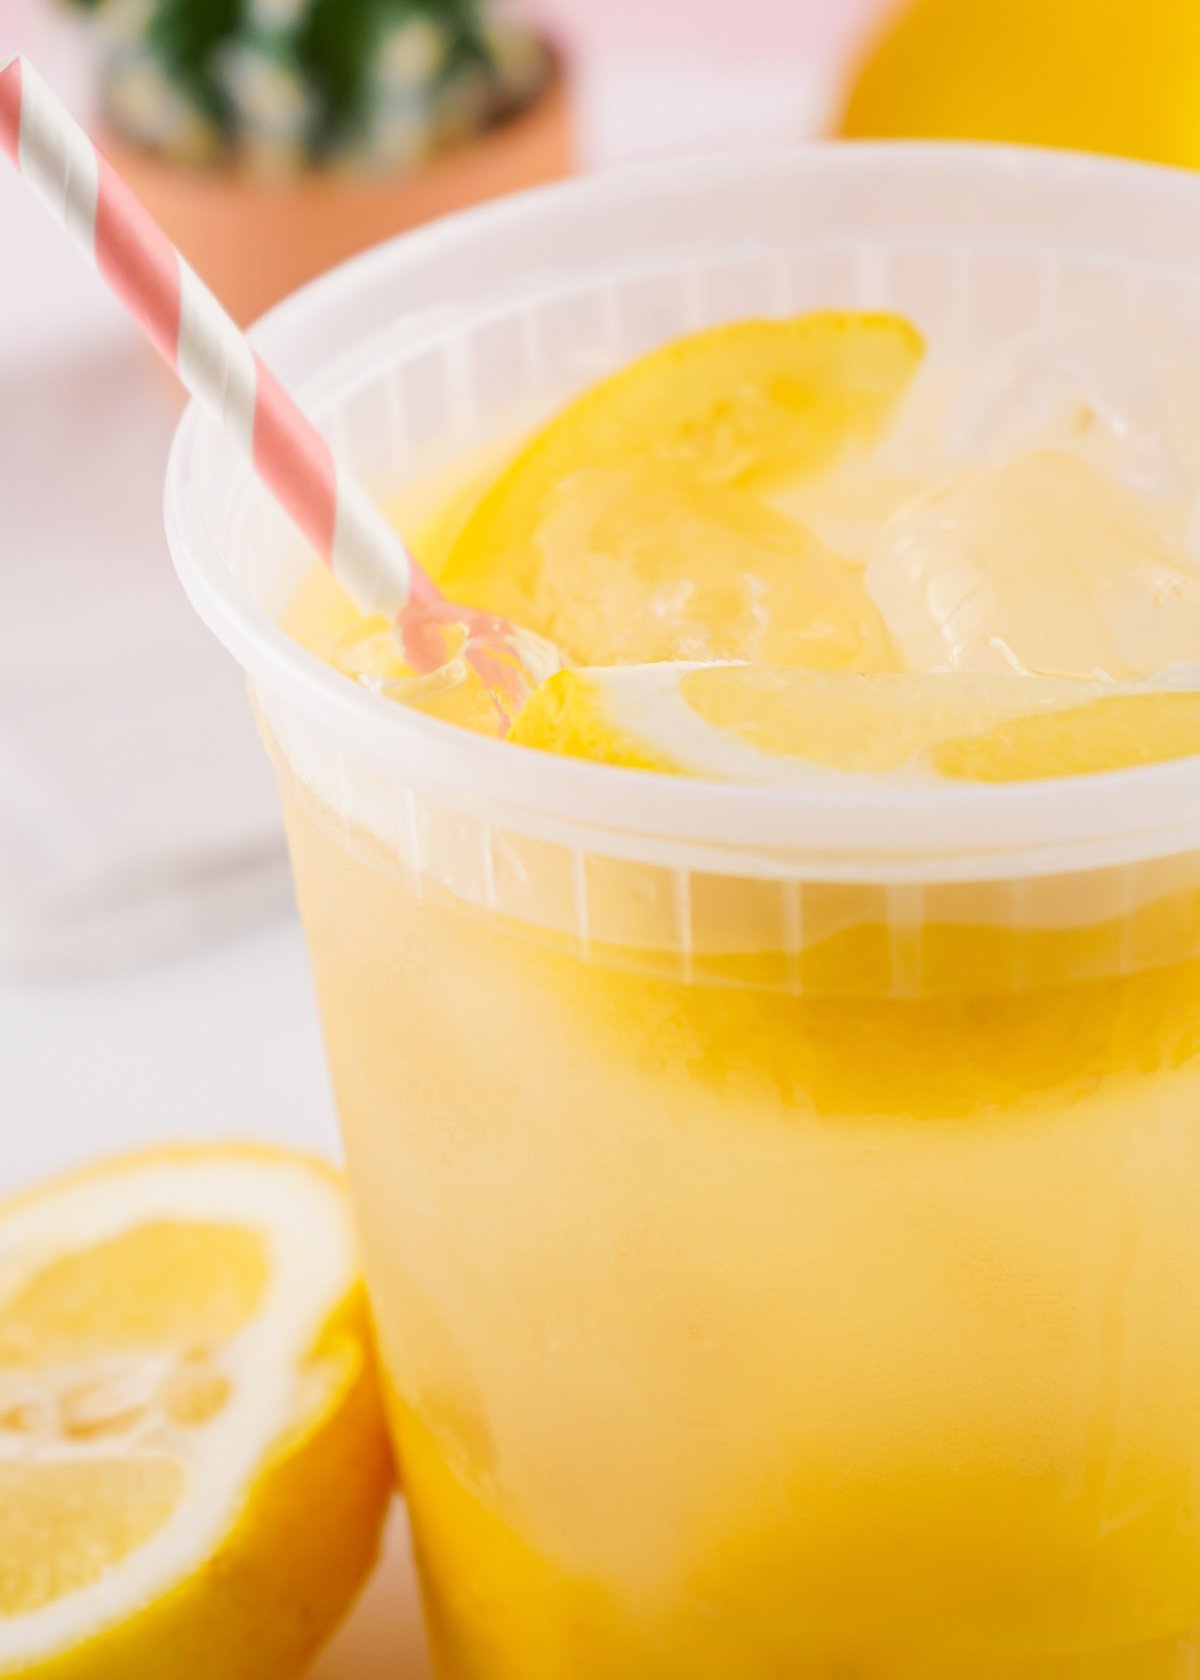 country fair lemonade TikTok inspired recipe with a pink and white straw